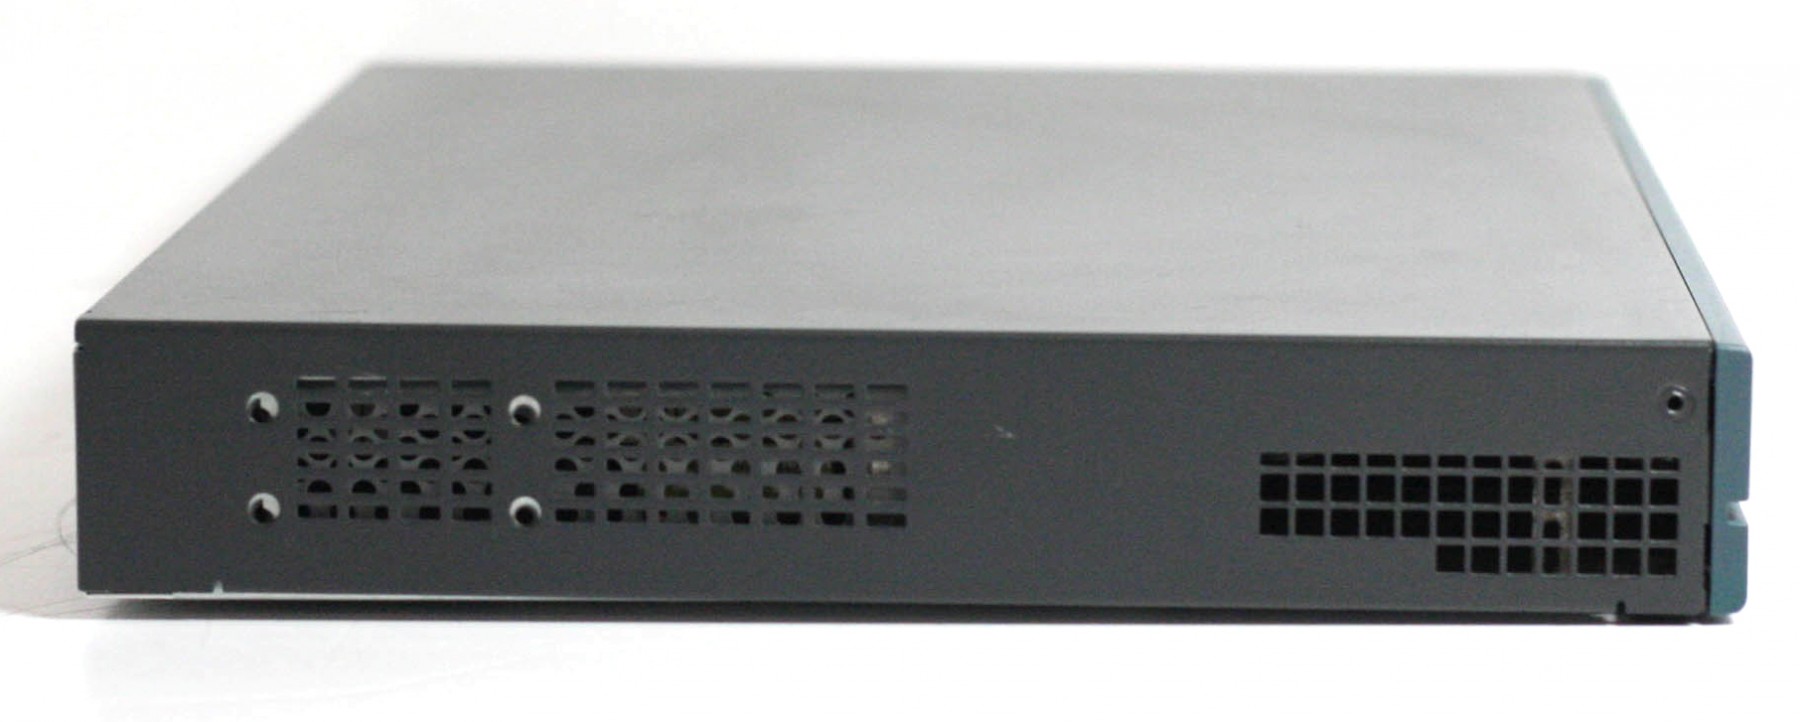 10000509-Cisco 1841 2-Port Wired Router -image